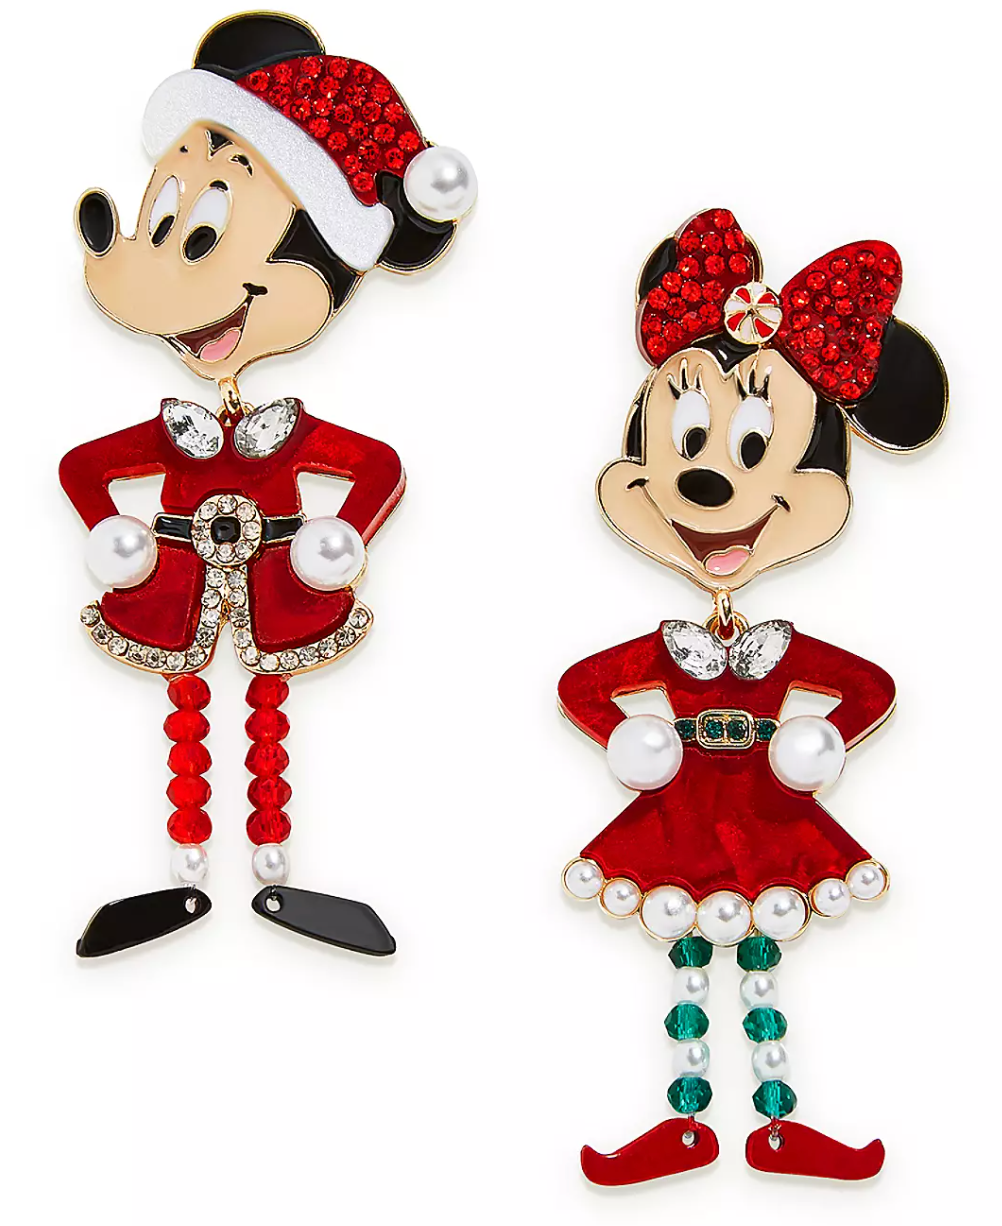 Disney Earrings - Baublebar Mickey and Minnie Holiday 2022